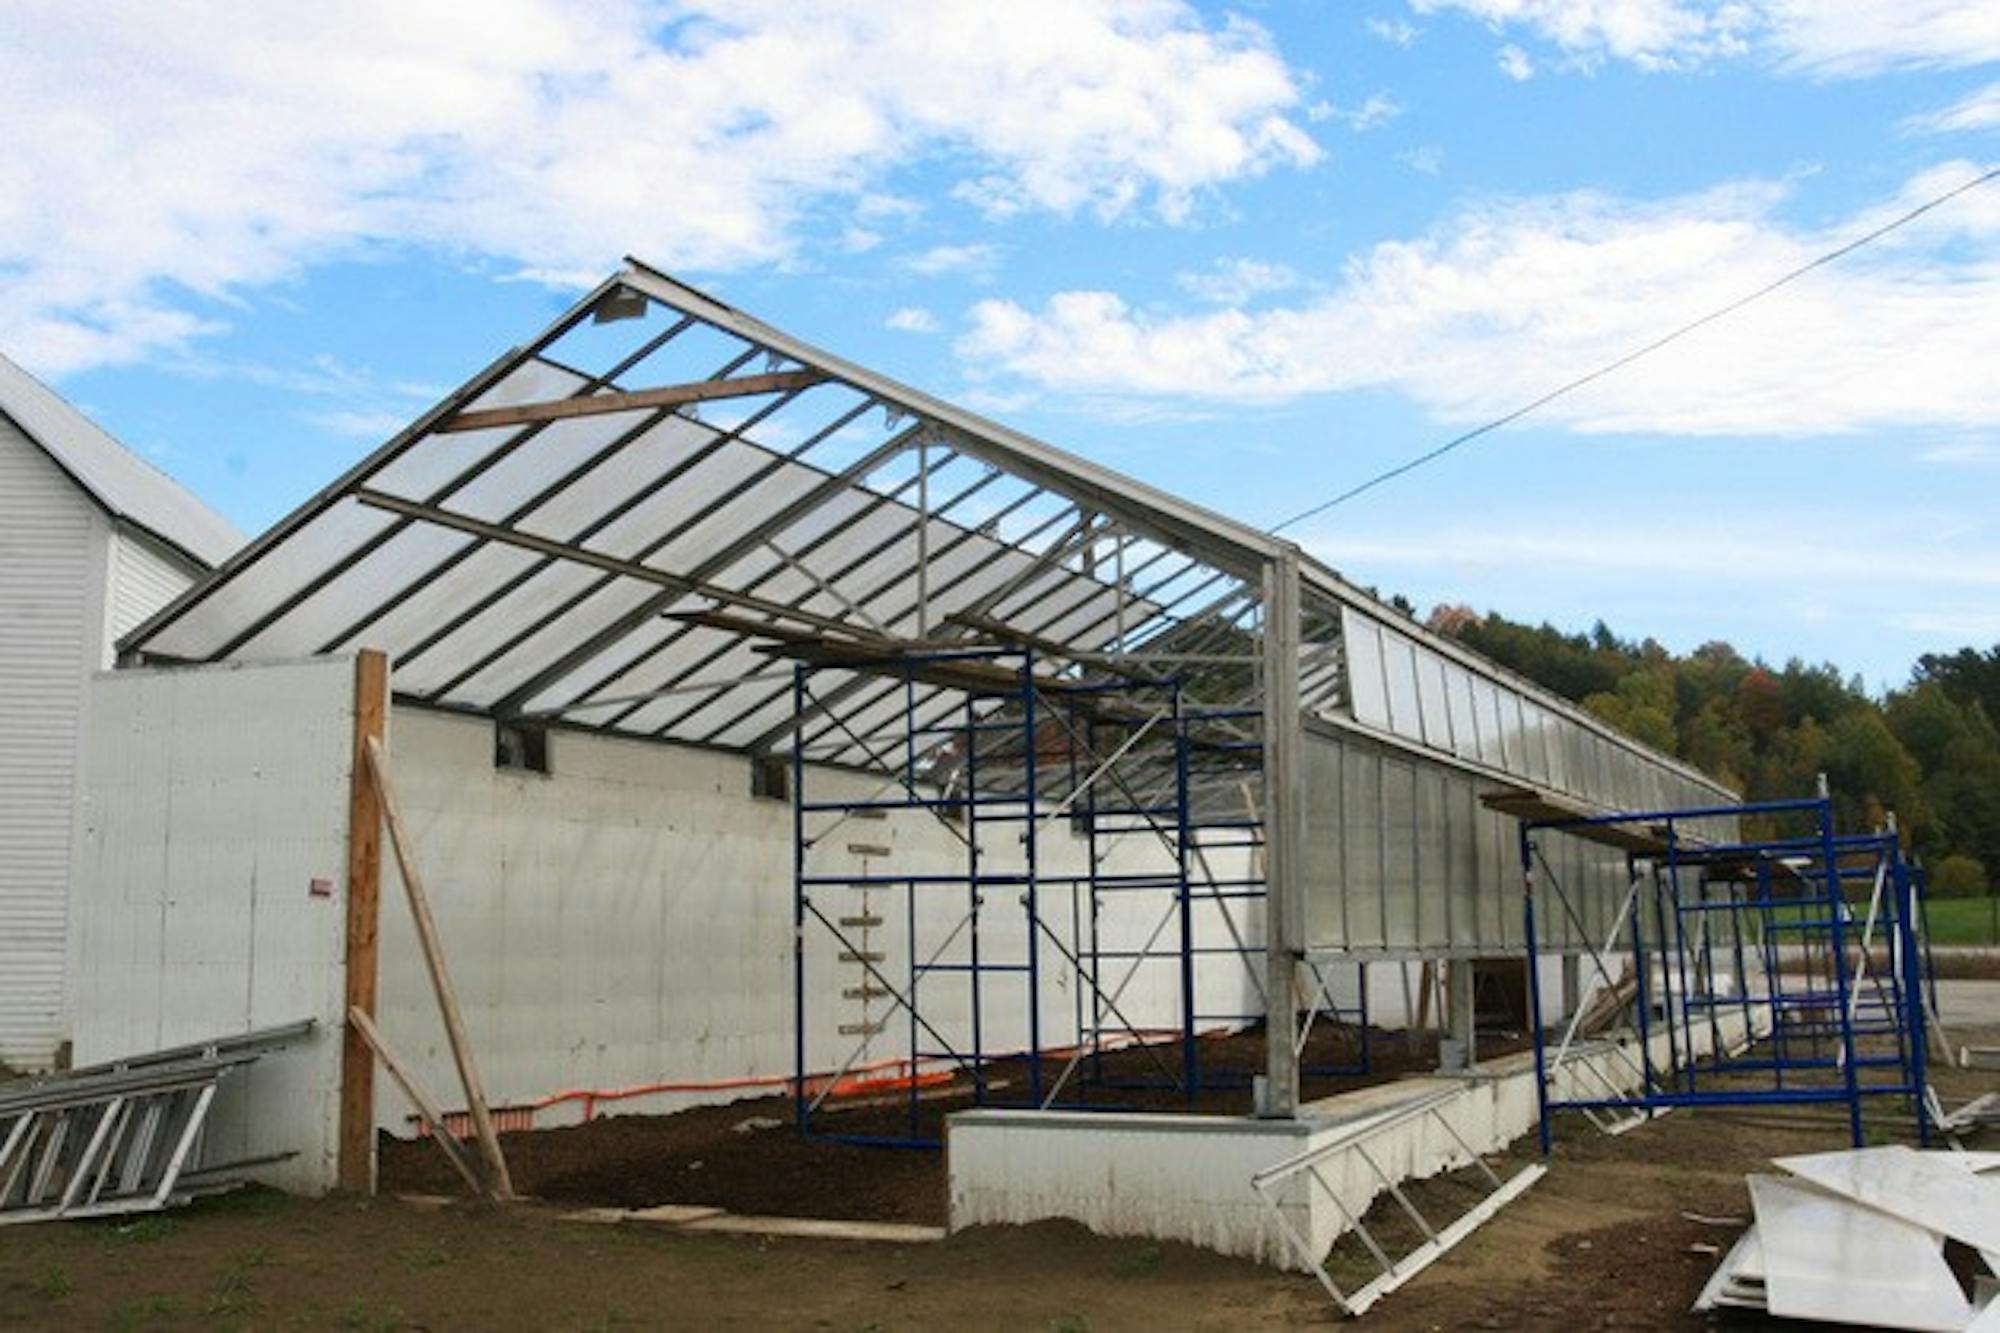 The new greenhouse at the organic farm will offer 10 months of locally grown produce and has been completely designed and built by students.